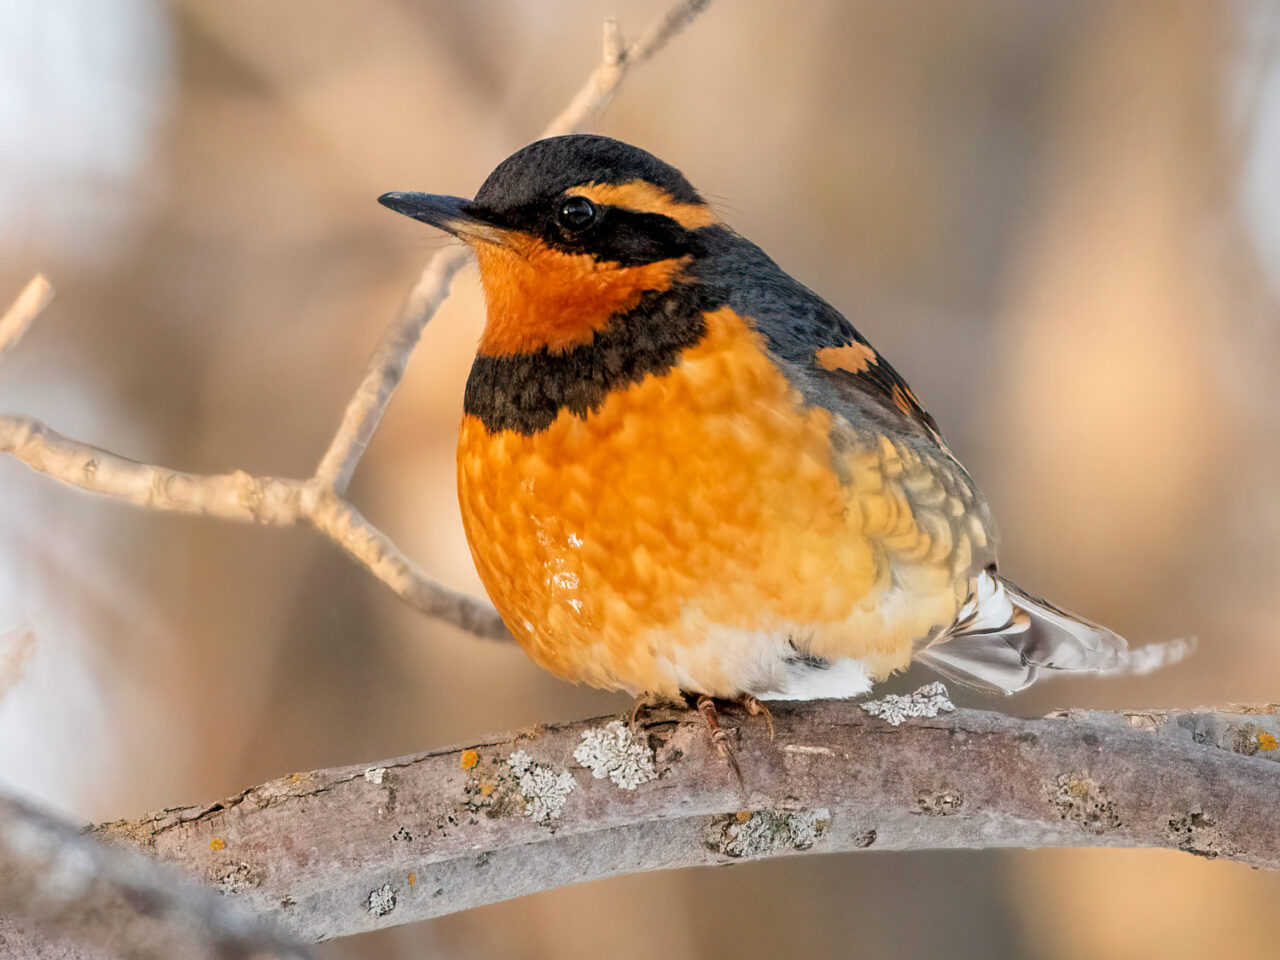 A large black and orange songbird sits fluffed up against the cold.